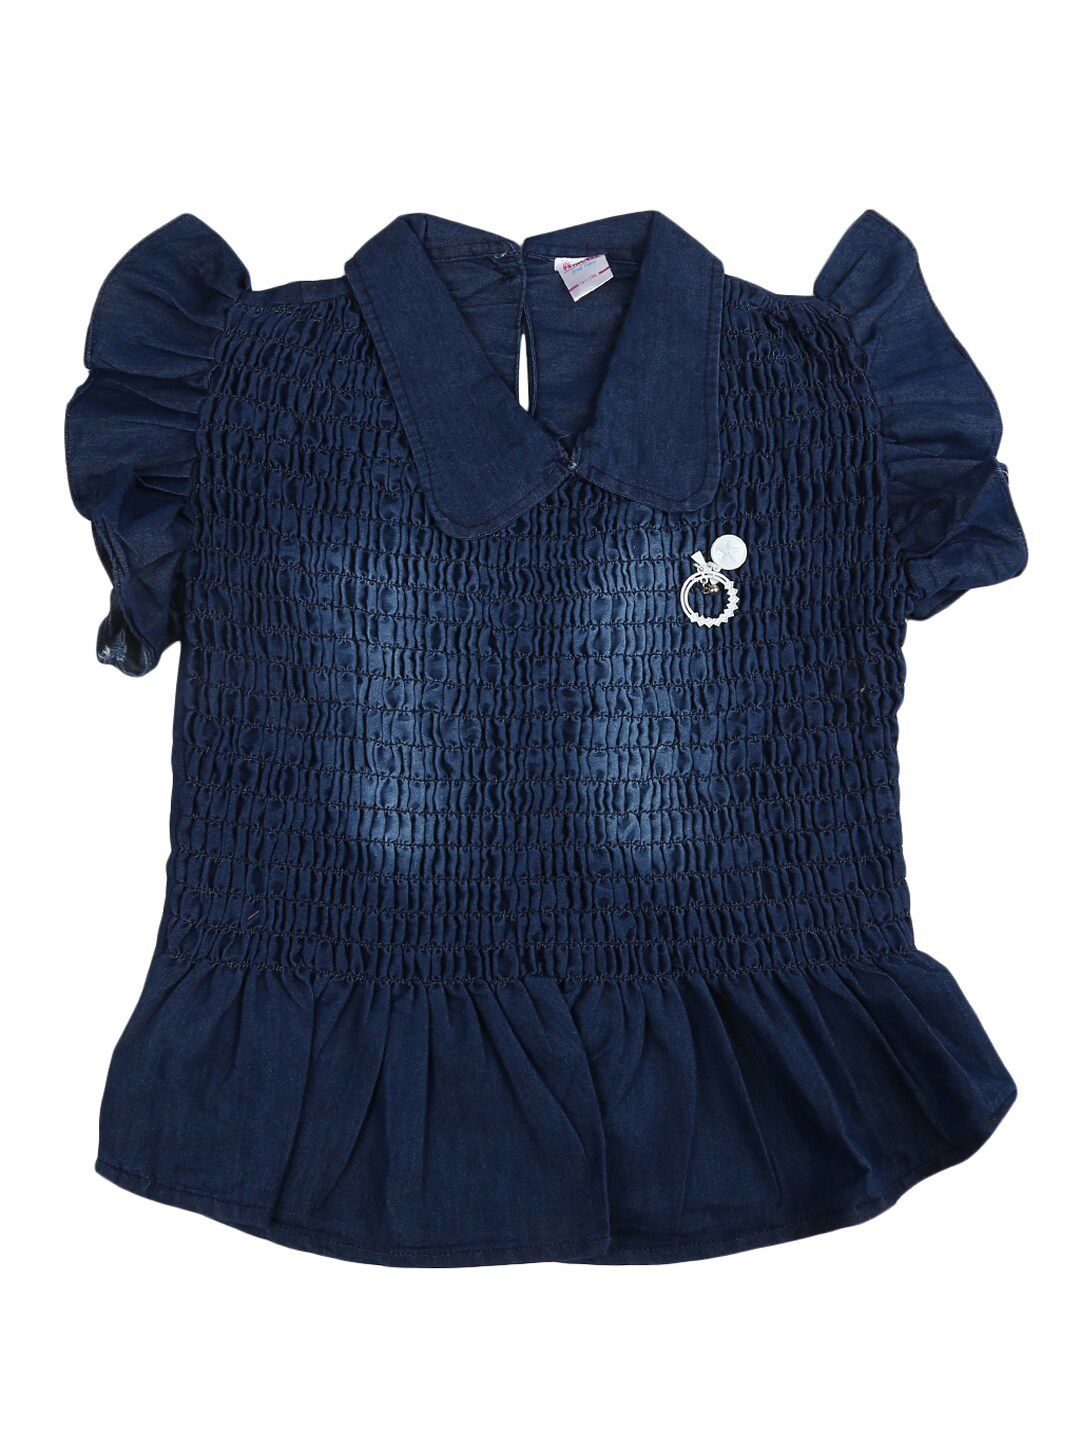 V-Mart Girls Knitted Smocked Top Price in India